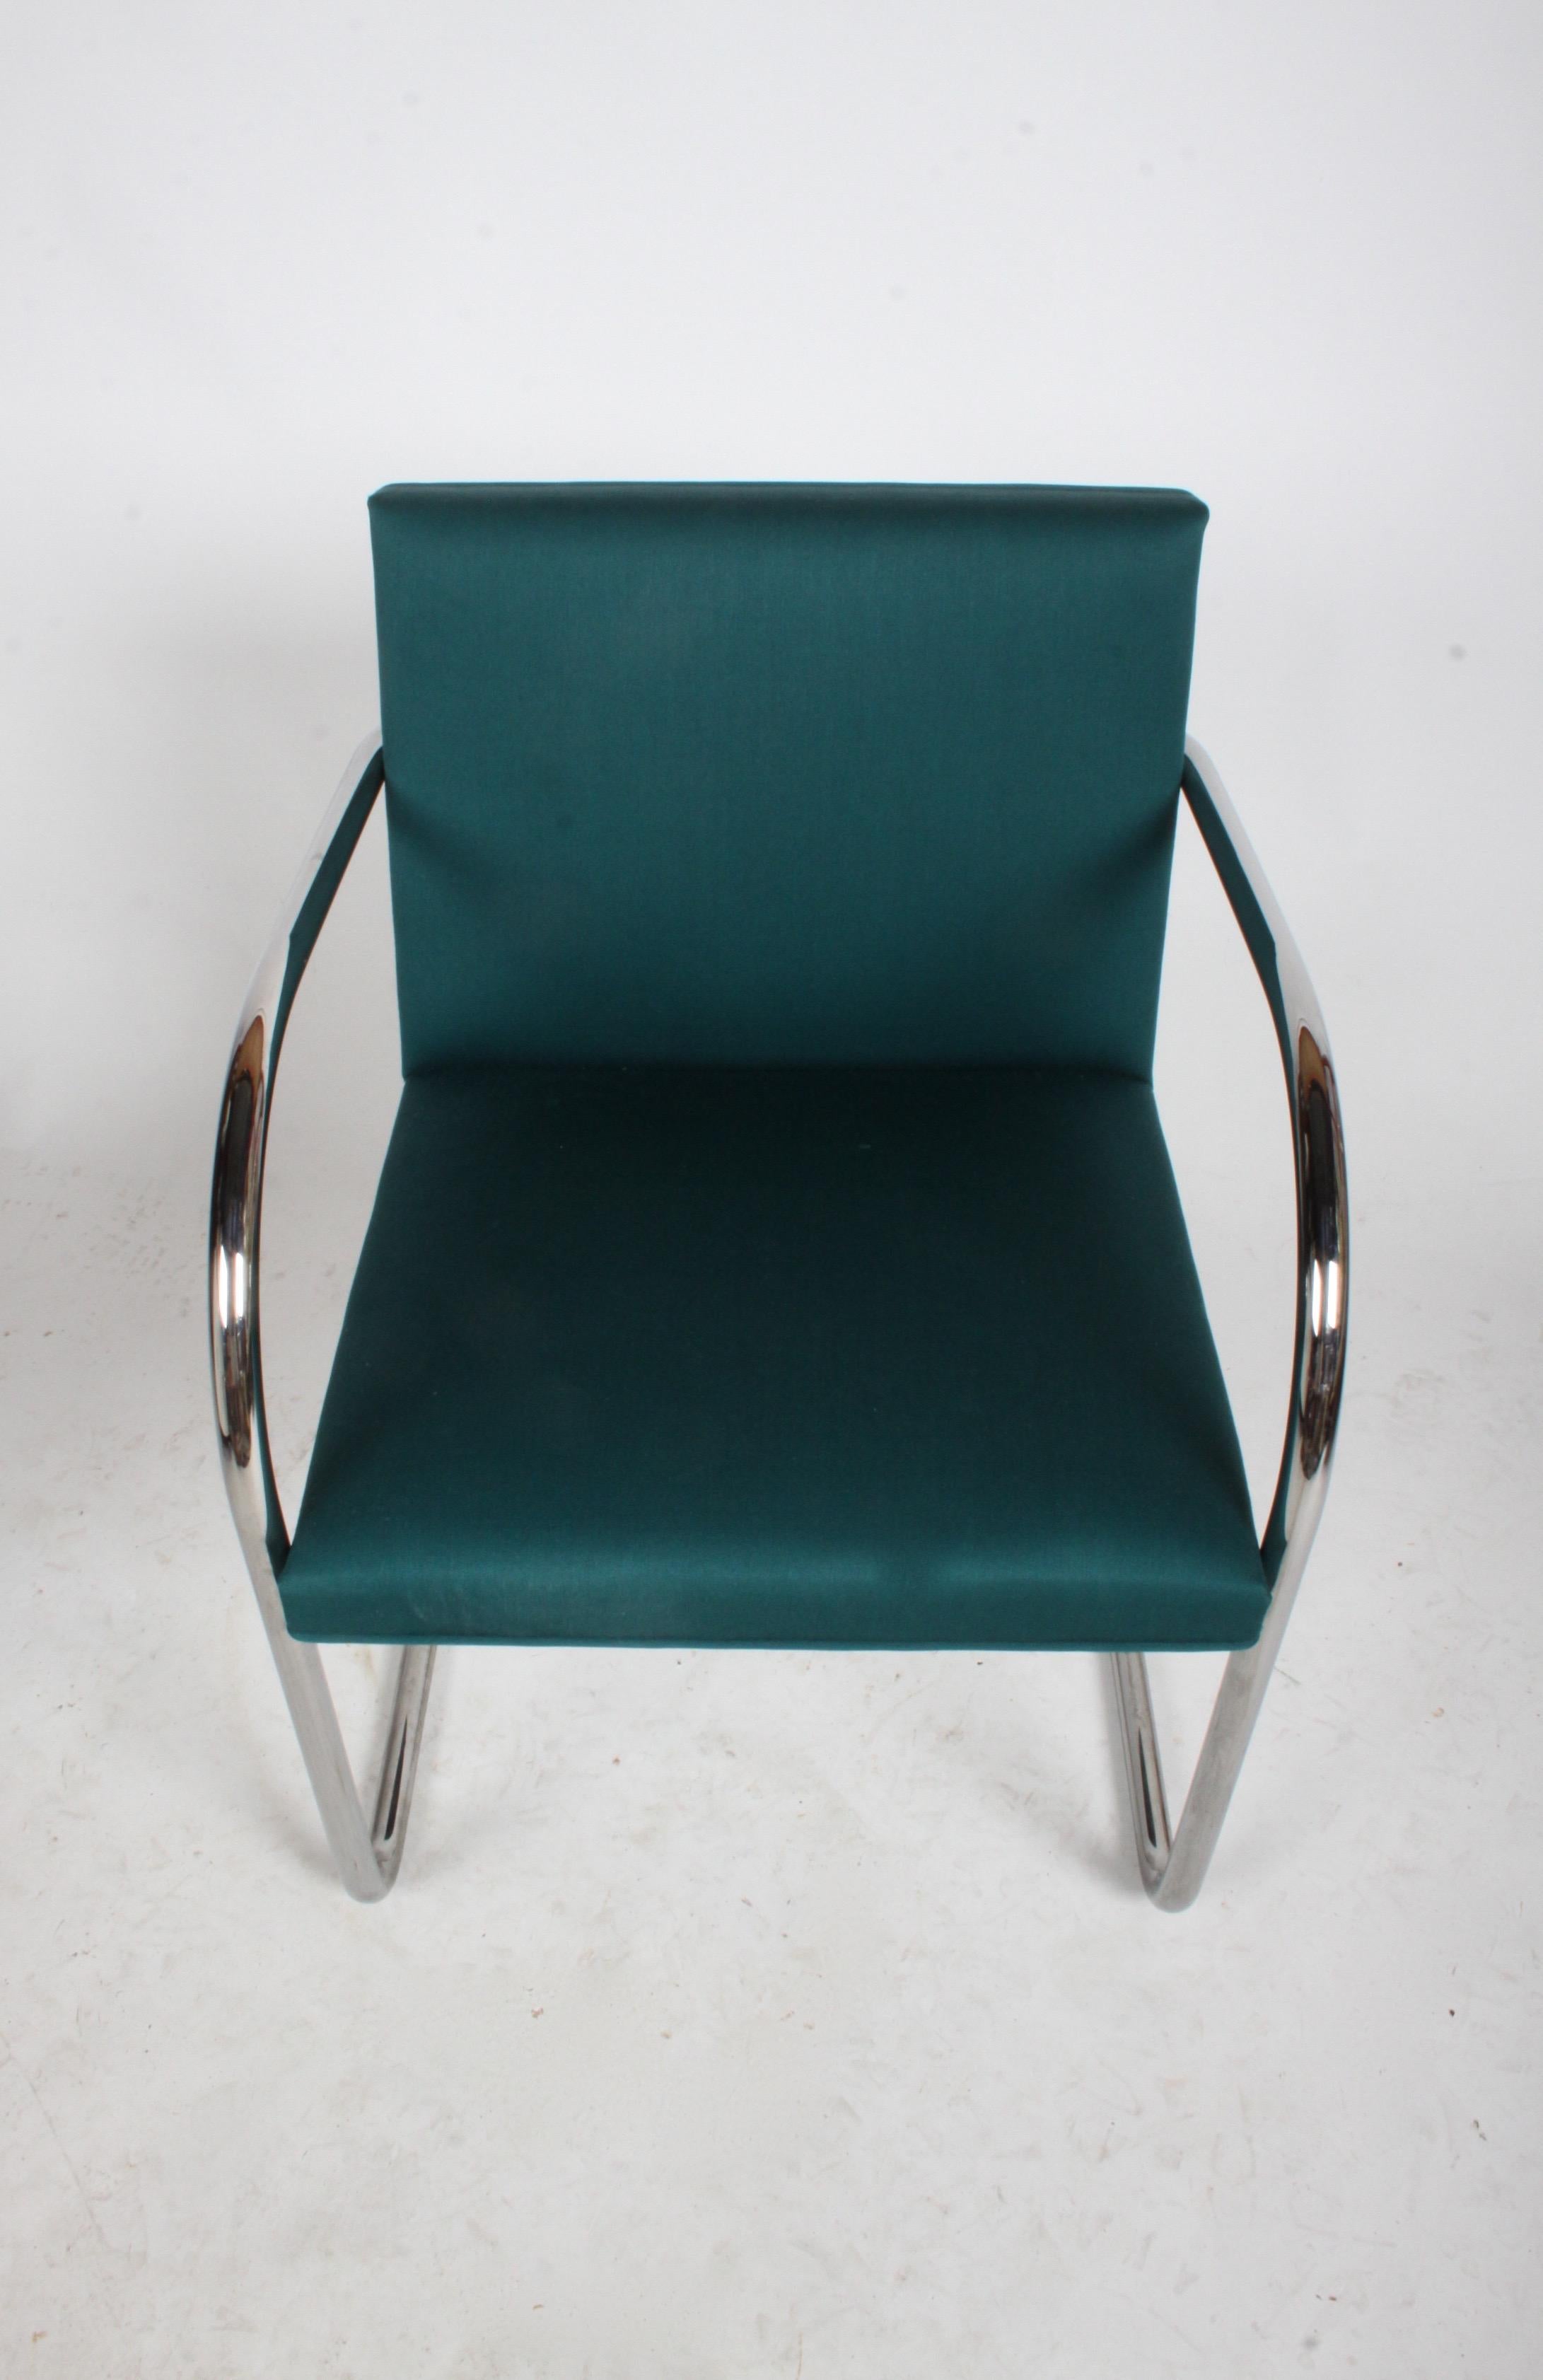 Mid-20th Century Mid-Century Modern Ludwig Mies van der Rohe for Knoll Tubular Brno Chairs x 2 For Sale